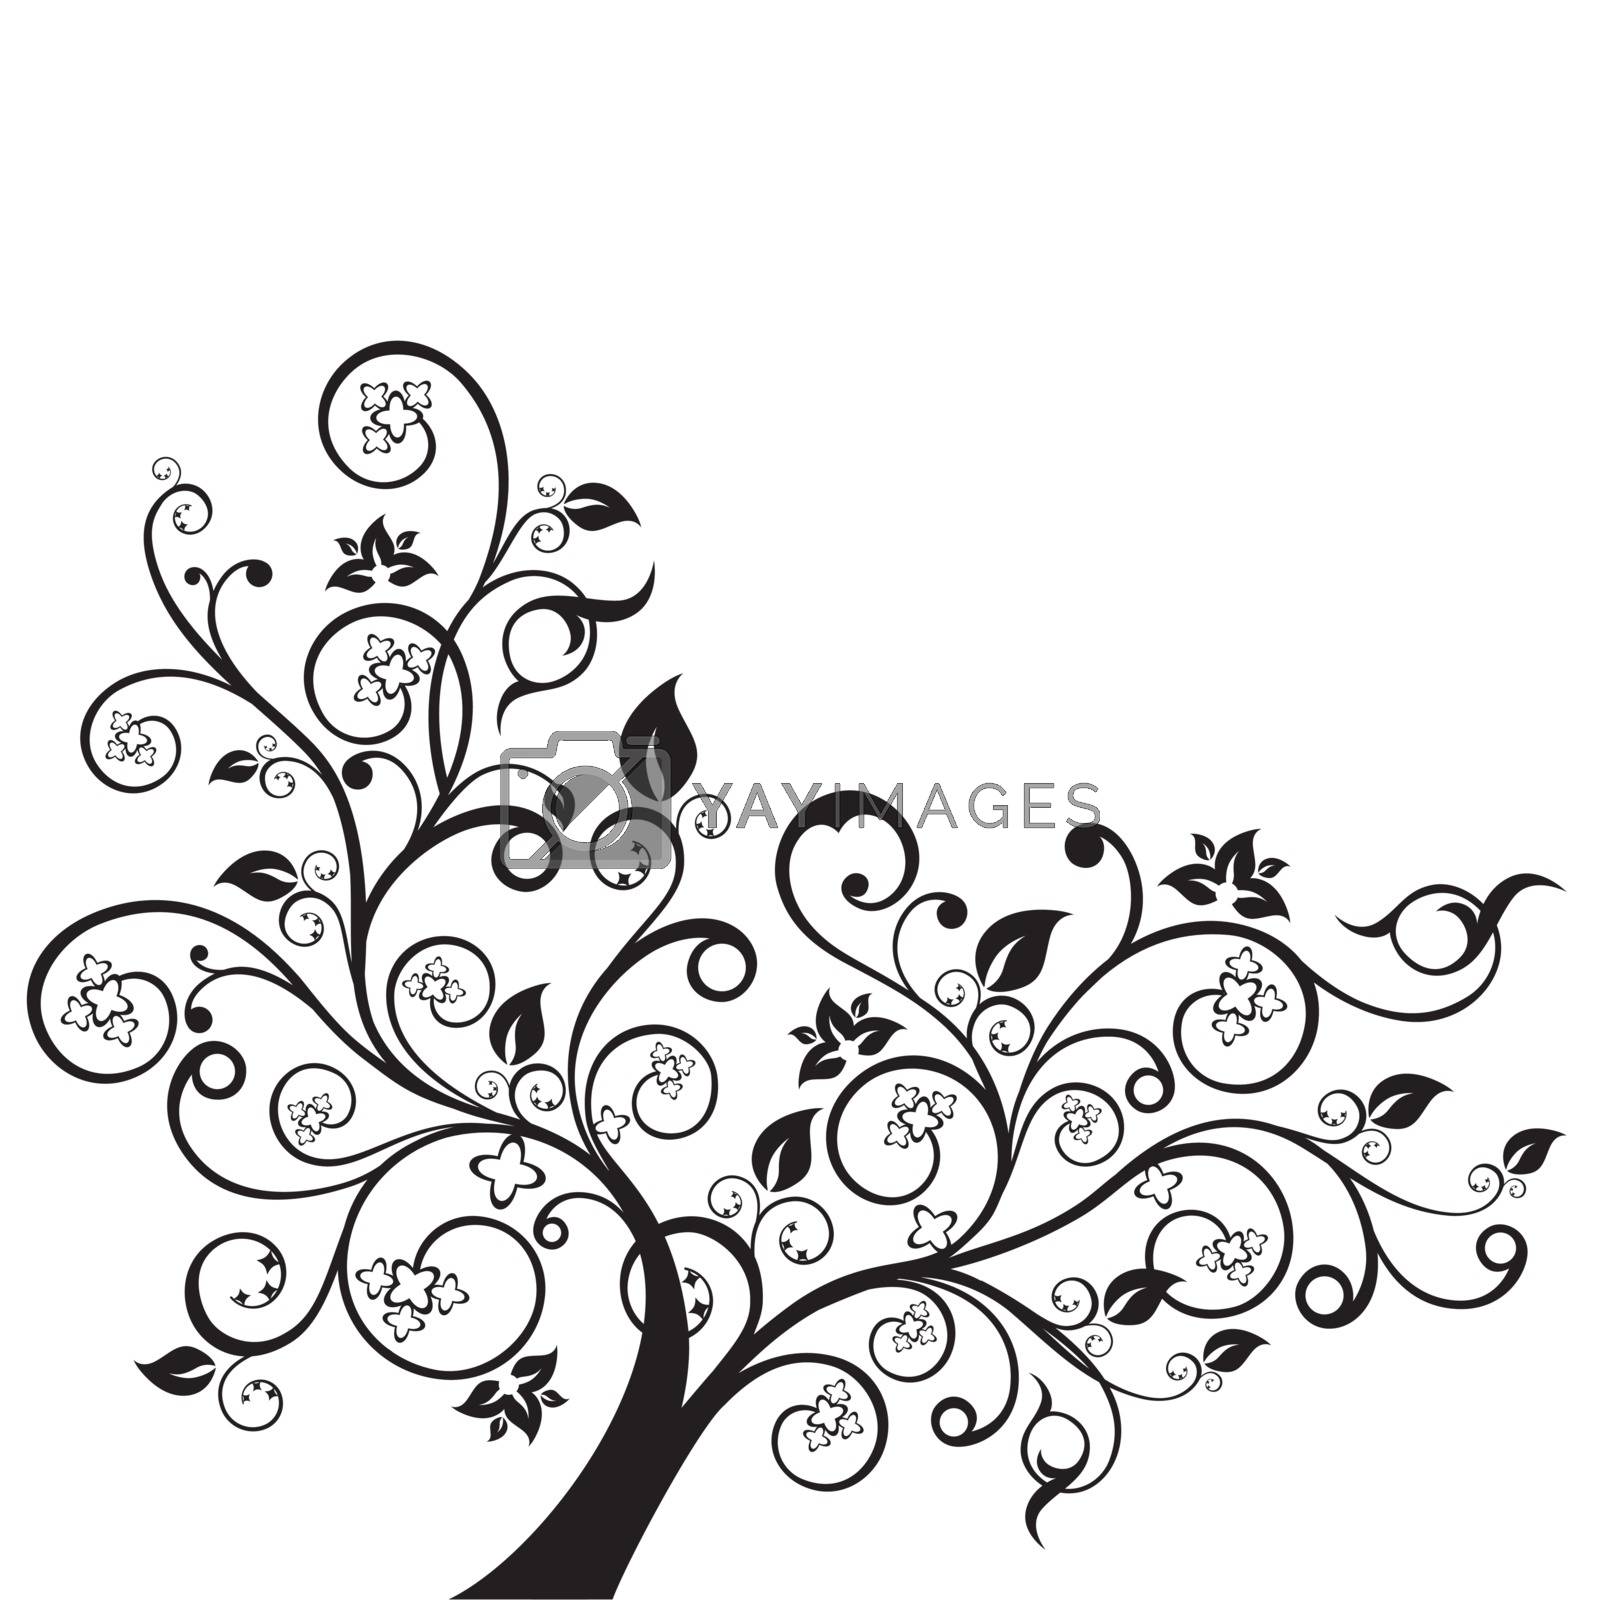 Royalty free image of Flowers and swirls design element silhouette in black by misslina